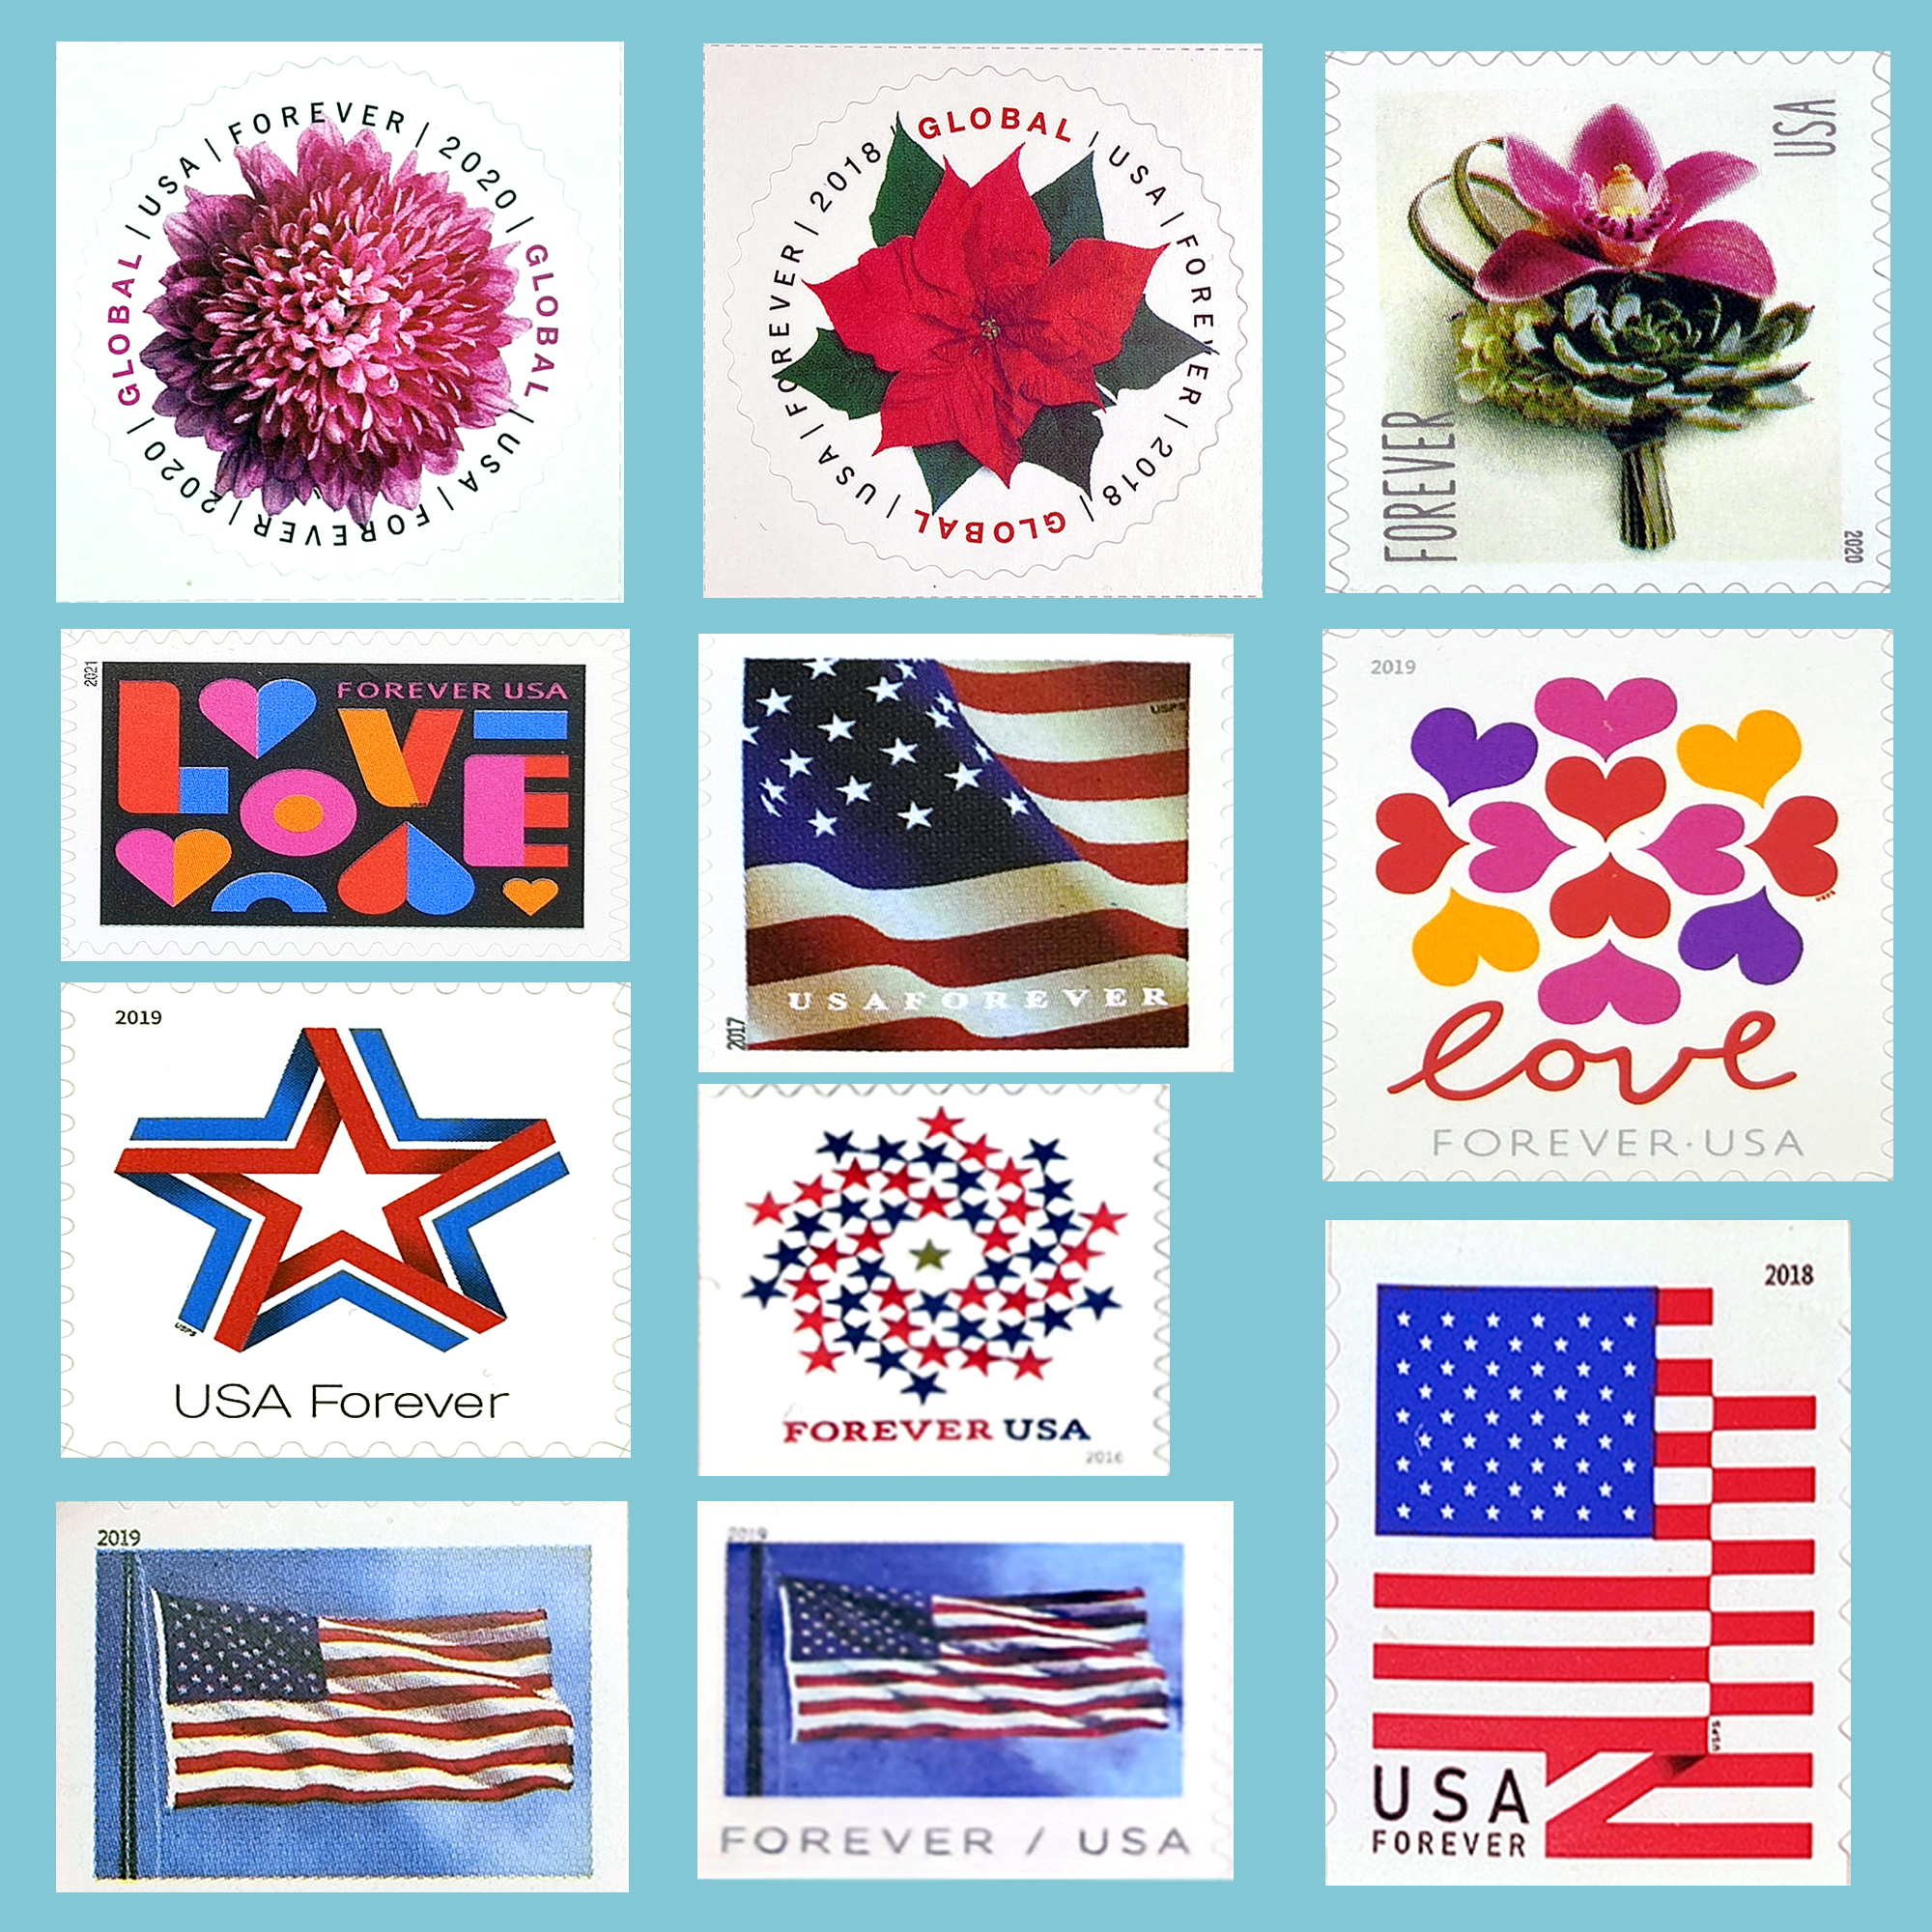 

free DHL 500pcs Forever 2018 US stamp Postage New Sealed Roll Coil Corsage love flowers USA 2017 2019 Envelope sticker Star stickers